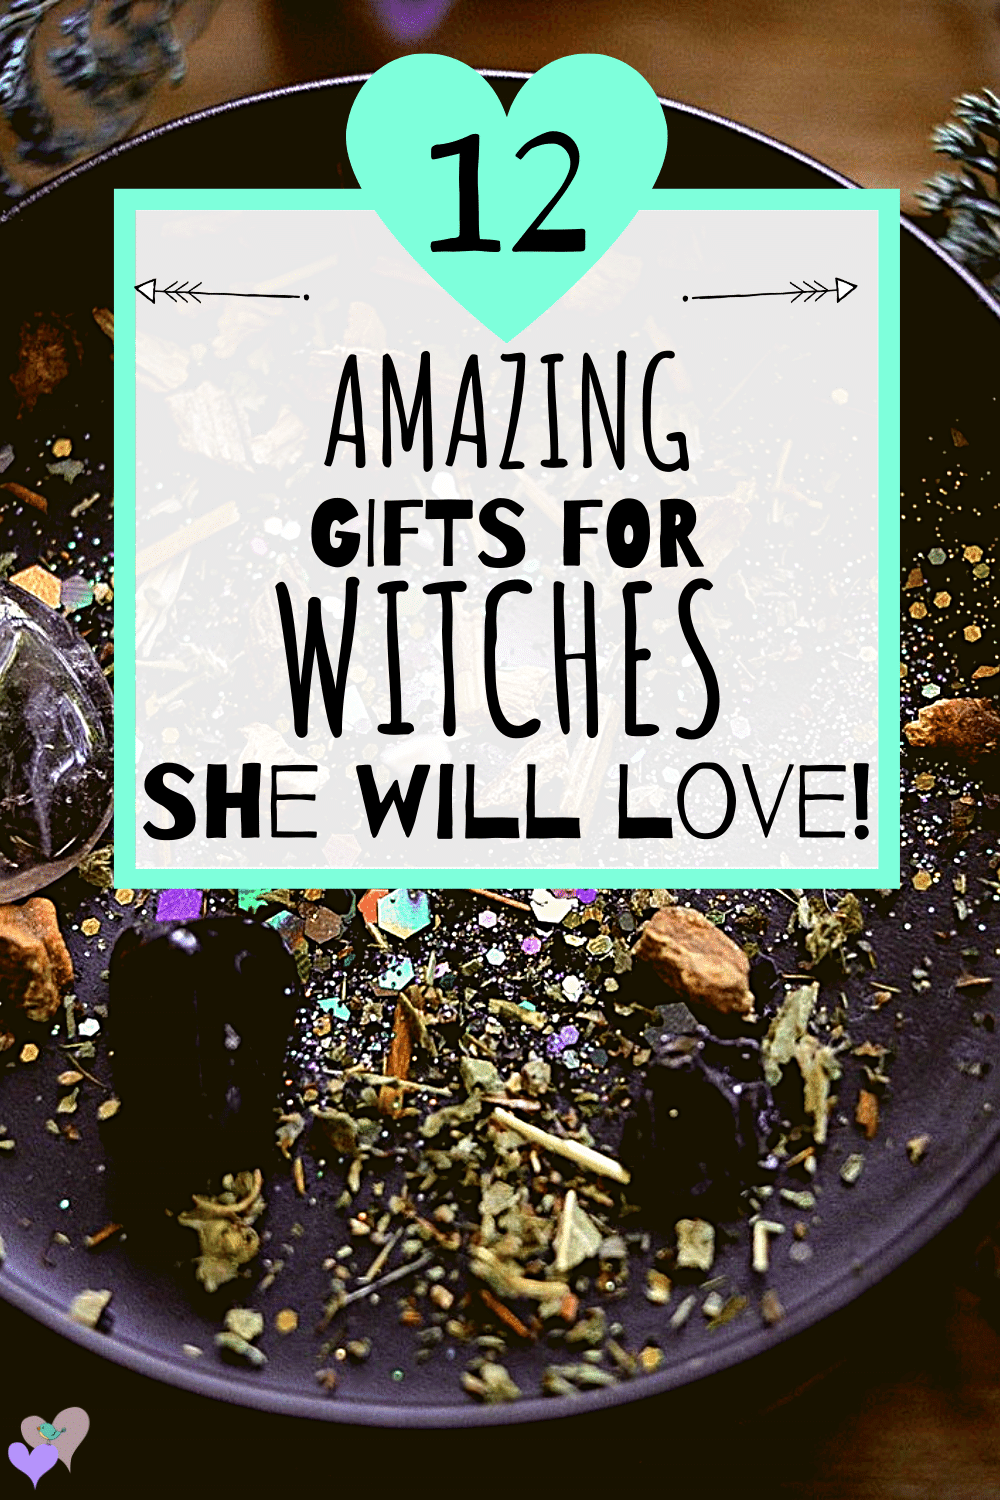 12 Amazing Gifts For Witches She Will Love!!! From candles, tarot decks, sage smudge sticks and even cauldrons, we have found you the most amazing witchy gifts that any witch will truly love to receive!